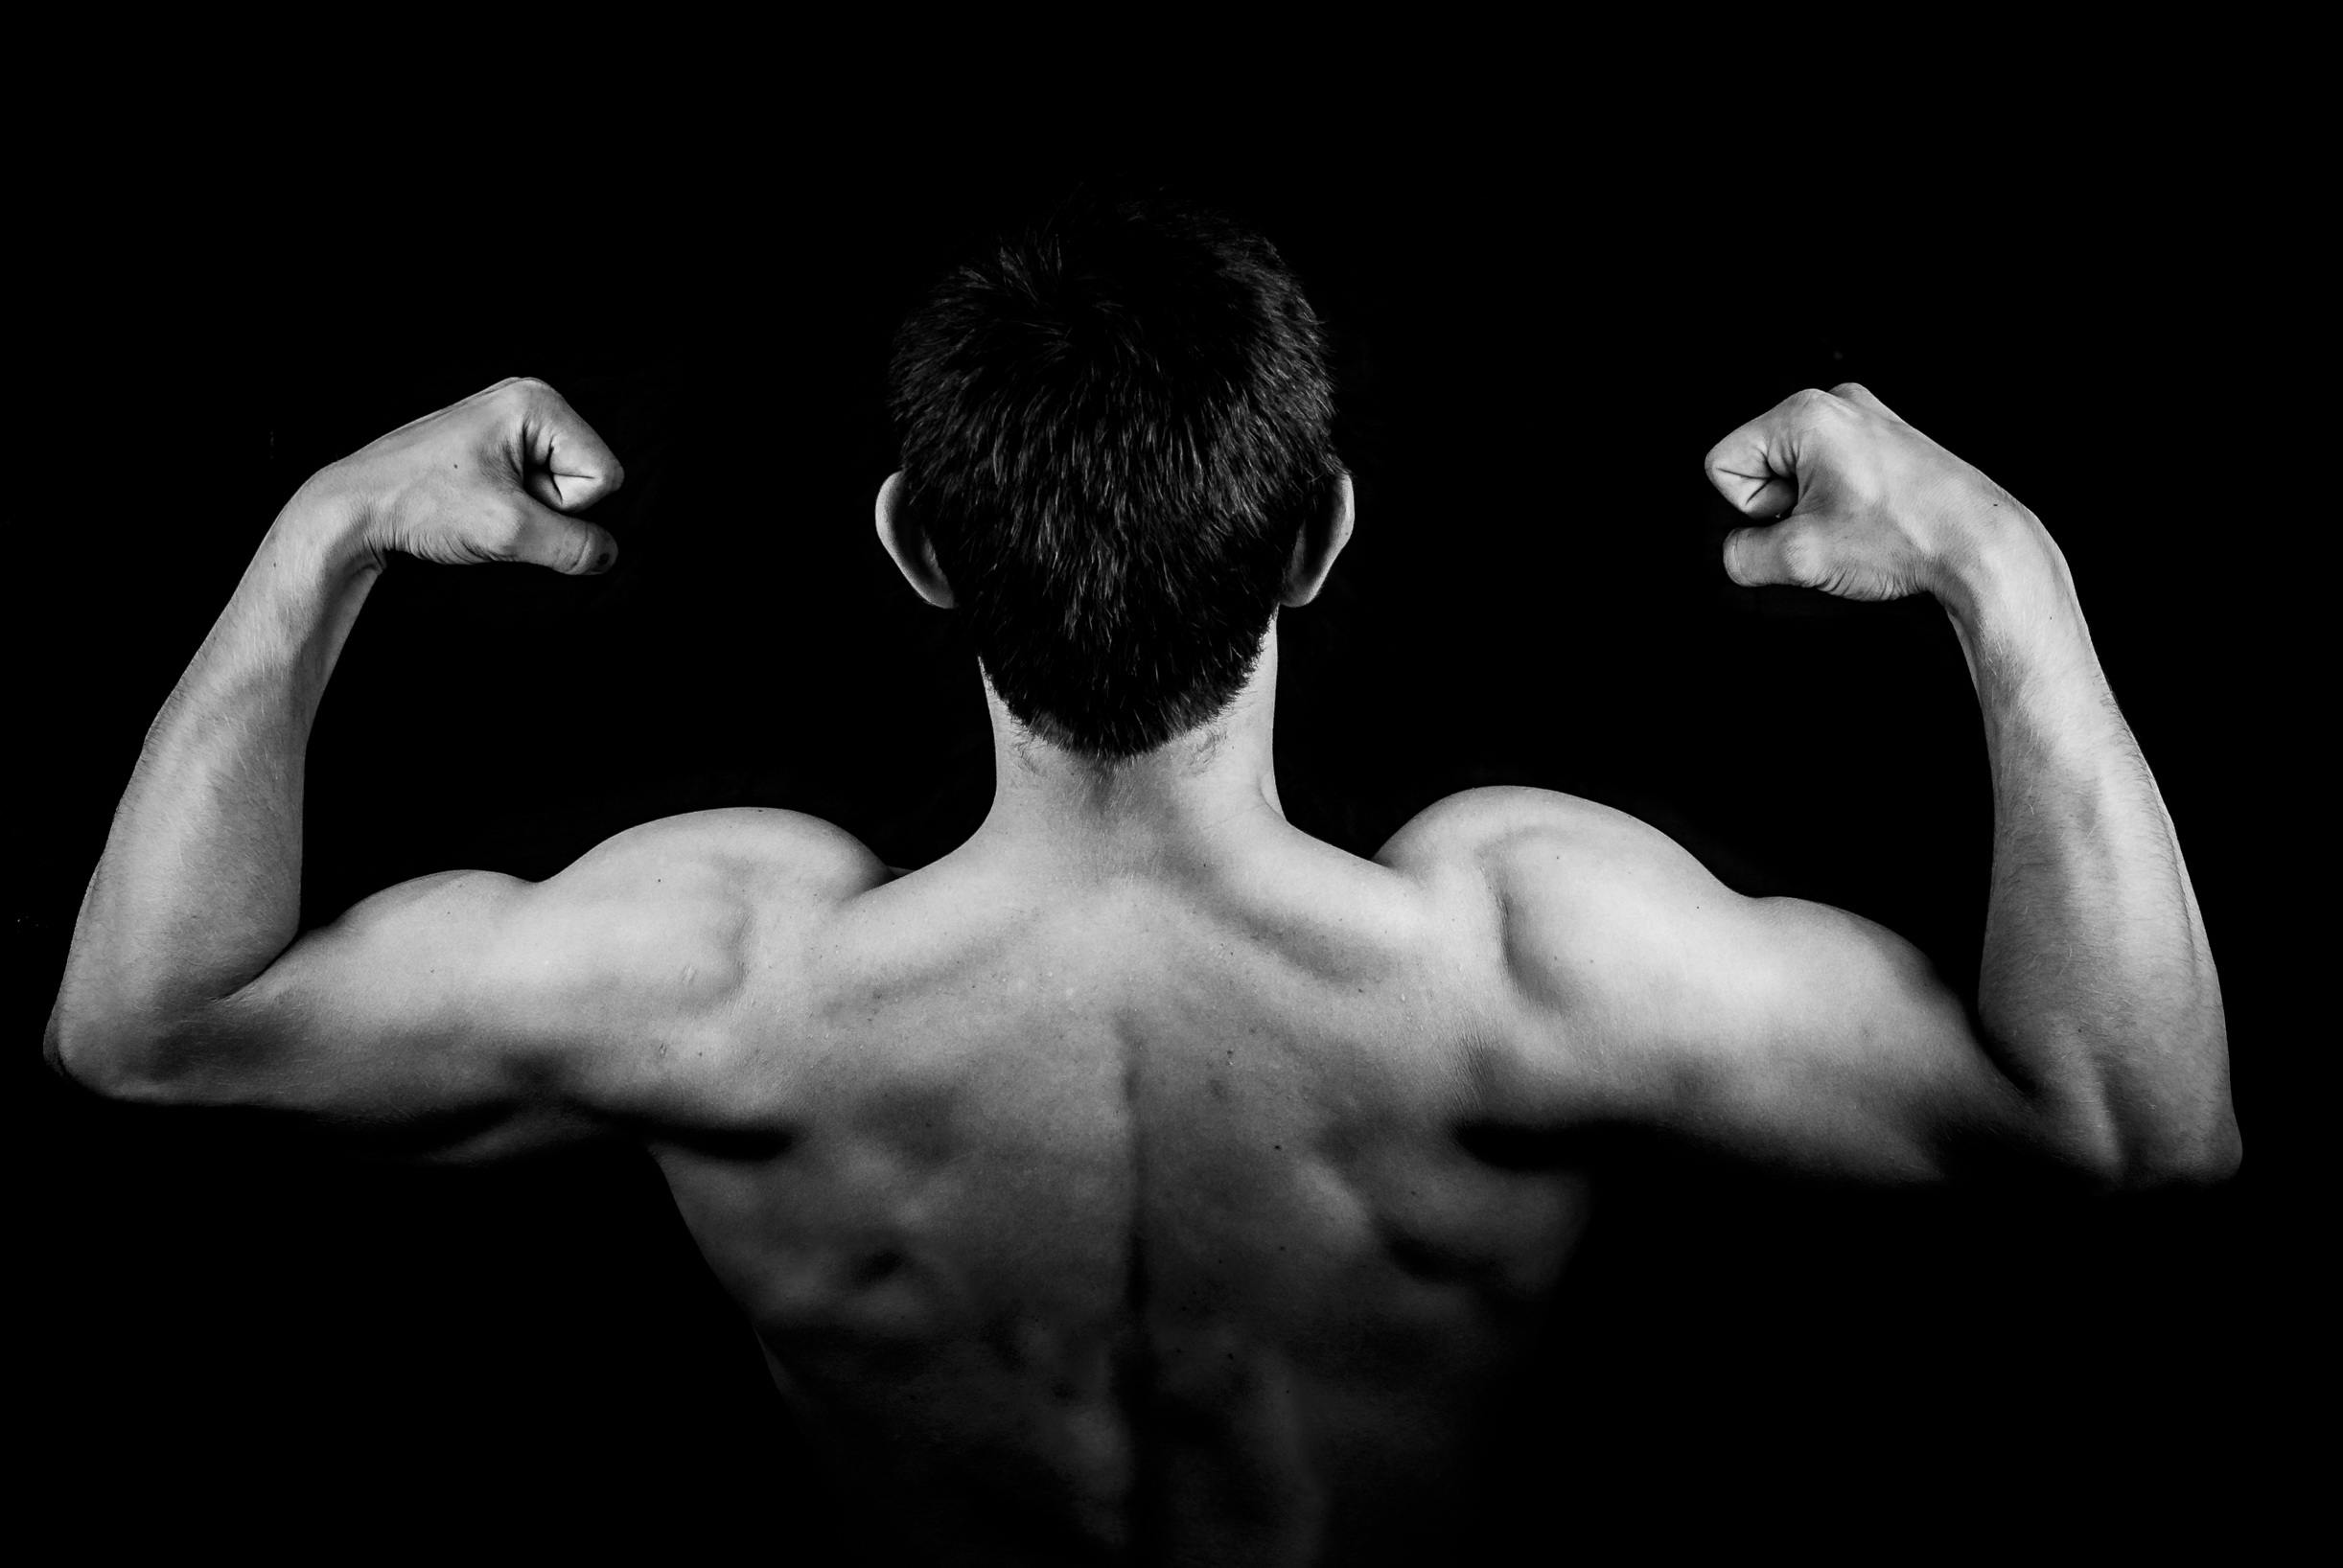 Man in Muscle Back View · Free Stock Photo